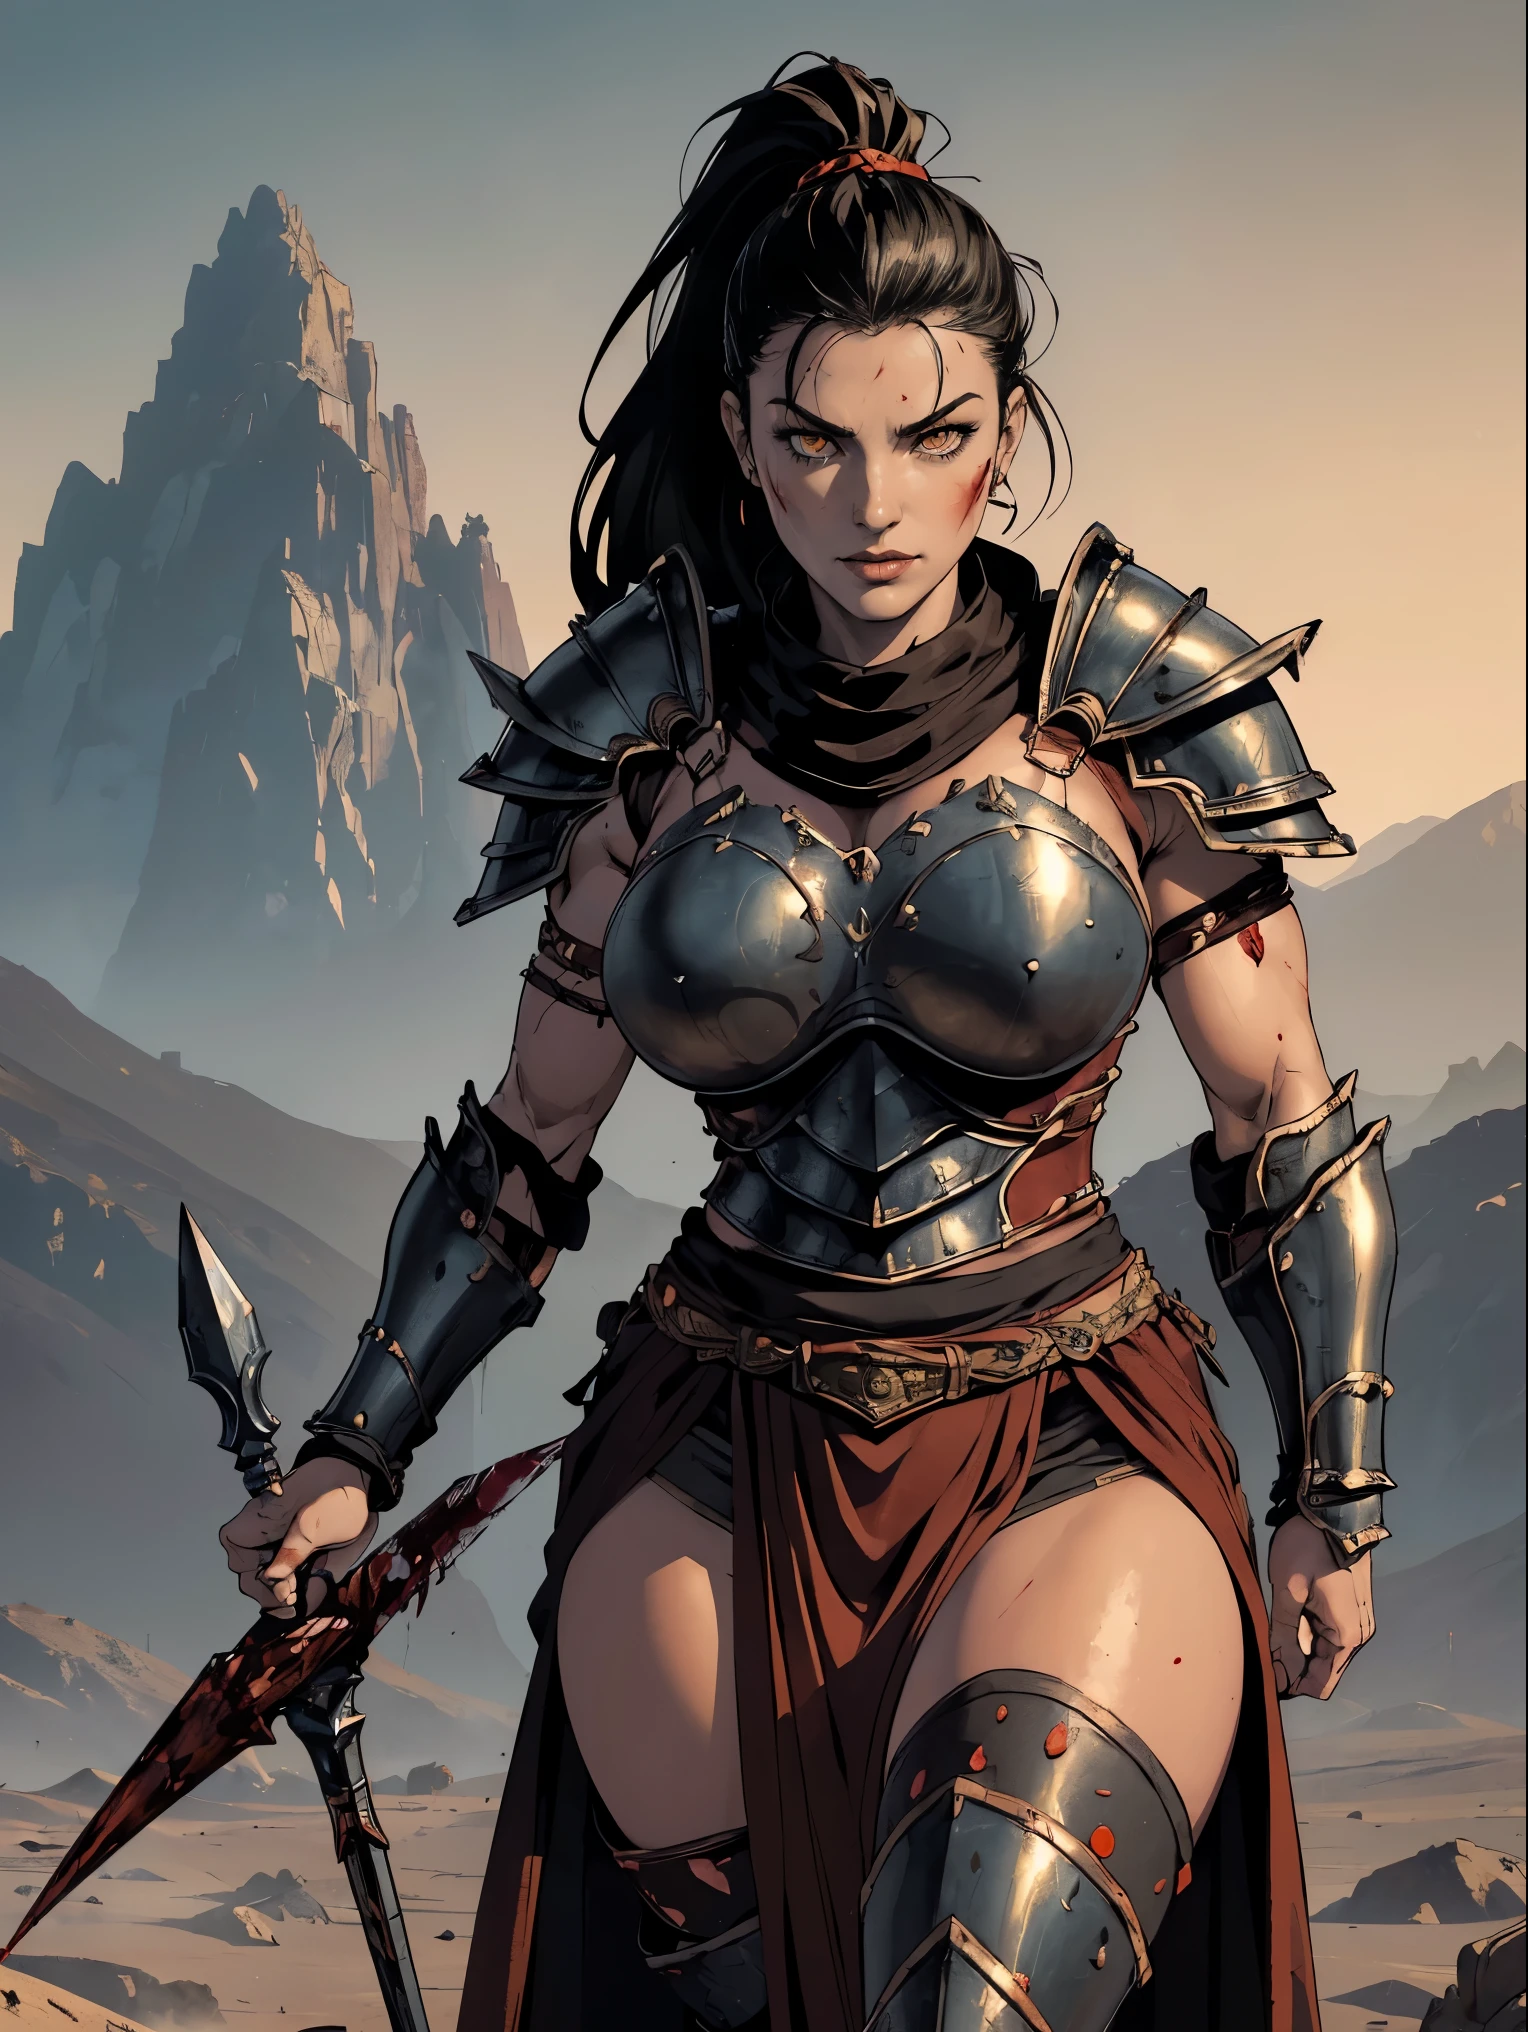 (masterpiece, top quality, best quality, official art, beautiful and aesthetic:1.2), (1girl:1.3), ((Sharp facial features, sharp features, hawkish features)), ((pale skin, orange eyes, big hair, long black hair, ponytail)), big tiddy chaos warrior girl, extremely detailed, portrait, looking at viewer, solo, (full body:0.6), detailed background, full-body shot, (hot desert mountain theme:1.1), chaos warrior, (spiky helmet), charlatan, smirk, mysterious, swaying in mountains, armor, red metal, brass trim, long boots, blood red fabric, pelvic curtain, loincloth, black leather, ((((spear, heavy armor, blood, blood splatter, armored, gigantic breasts, long legs, pelvic curtain, toned, muscular)))), cute belly button, toned tummy, slim waist, slim hips, long legs, medieval (mountain exterior:1.1) background, dark mysterious lighting, shadows, magical atmosphere, dutch angle